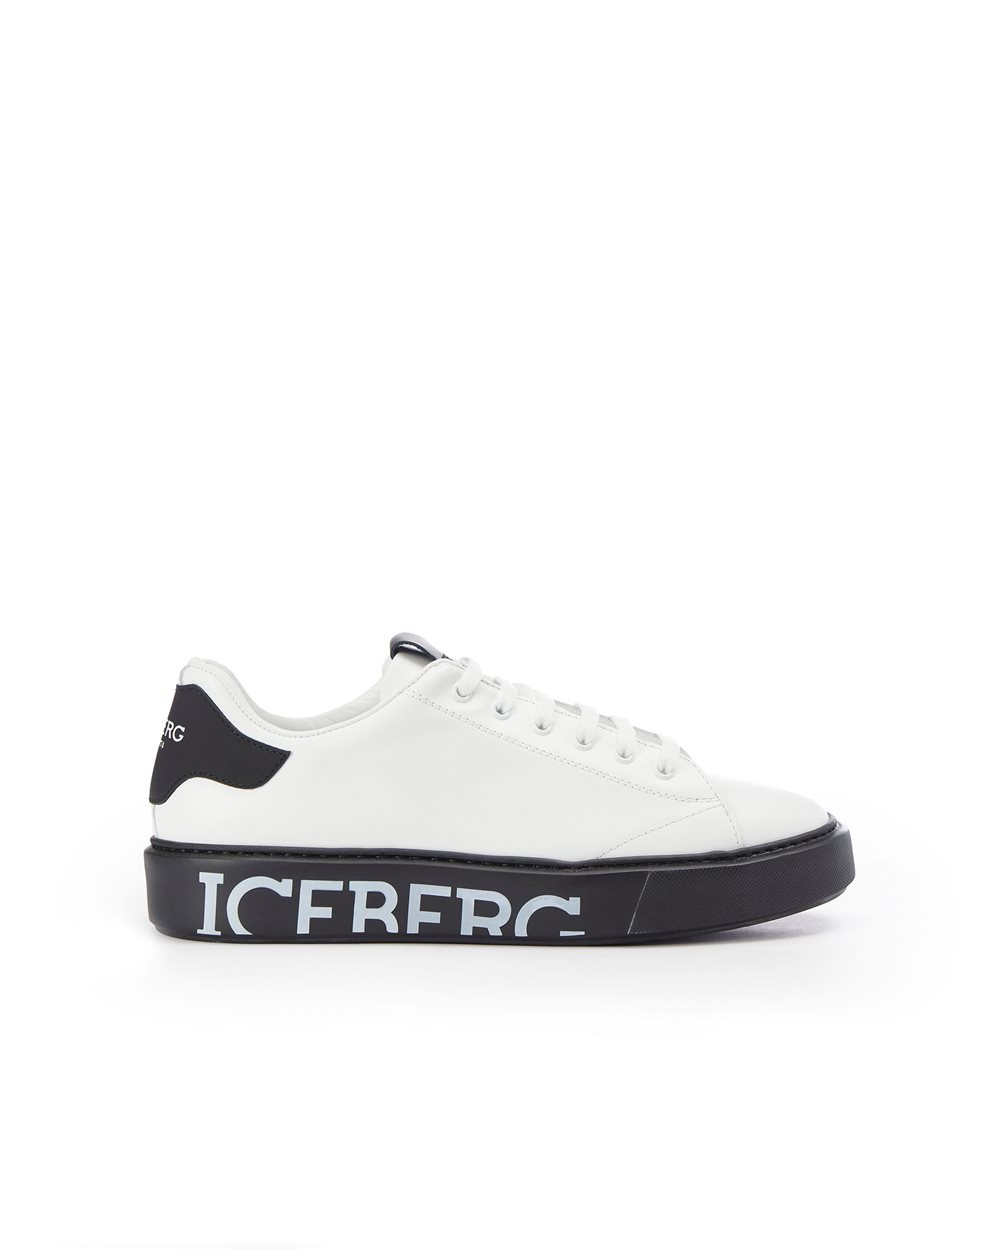 Leather Bozeman sneakers - Iceberg - Official Website